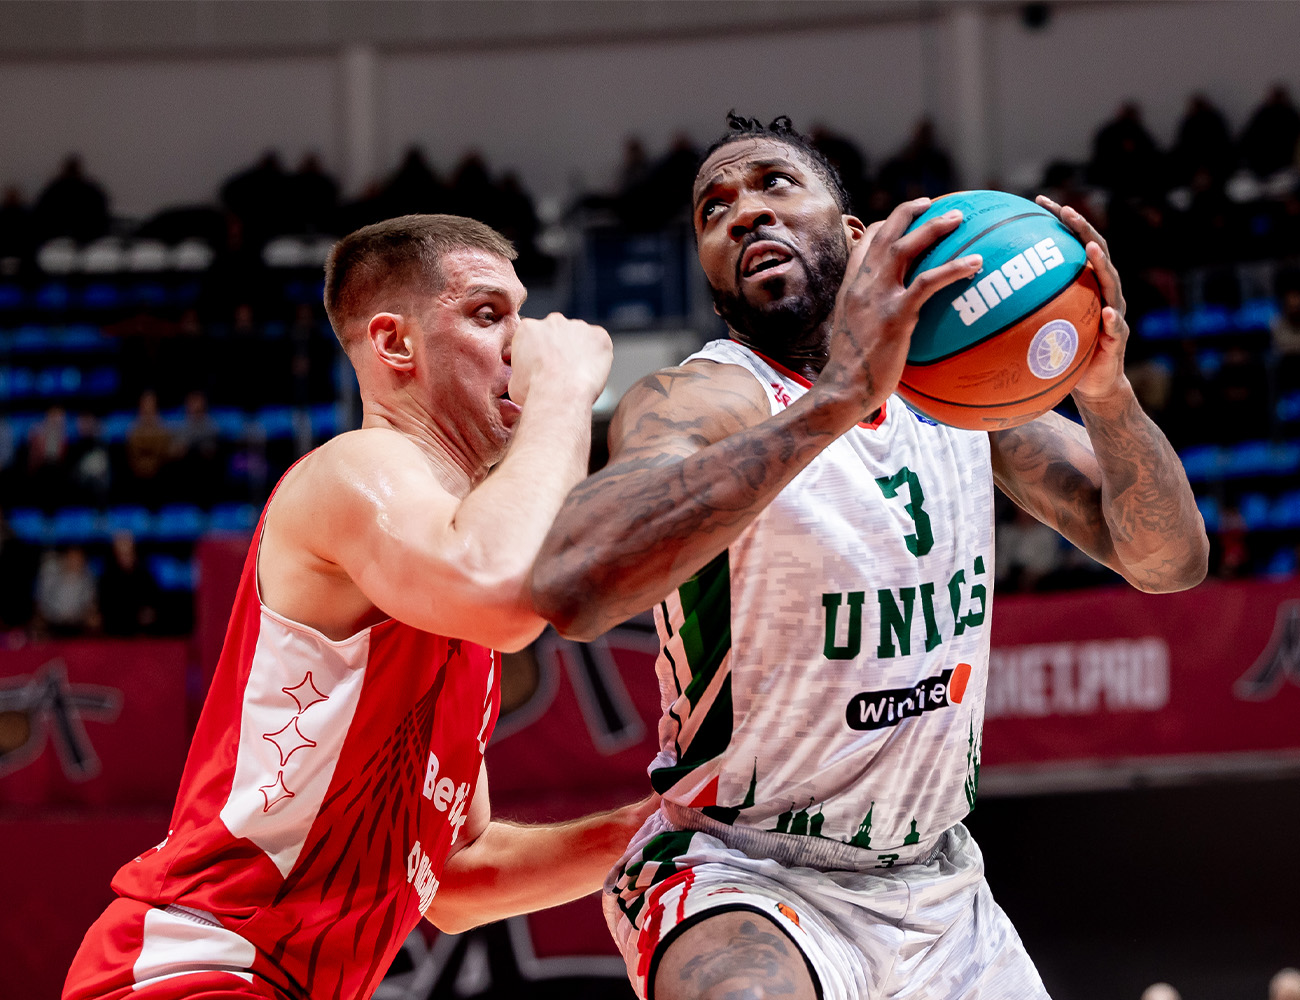 UNICS showed MBA a defensive master class